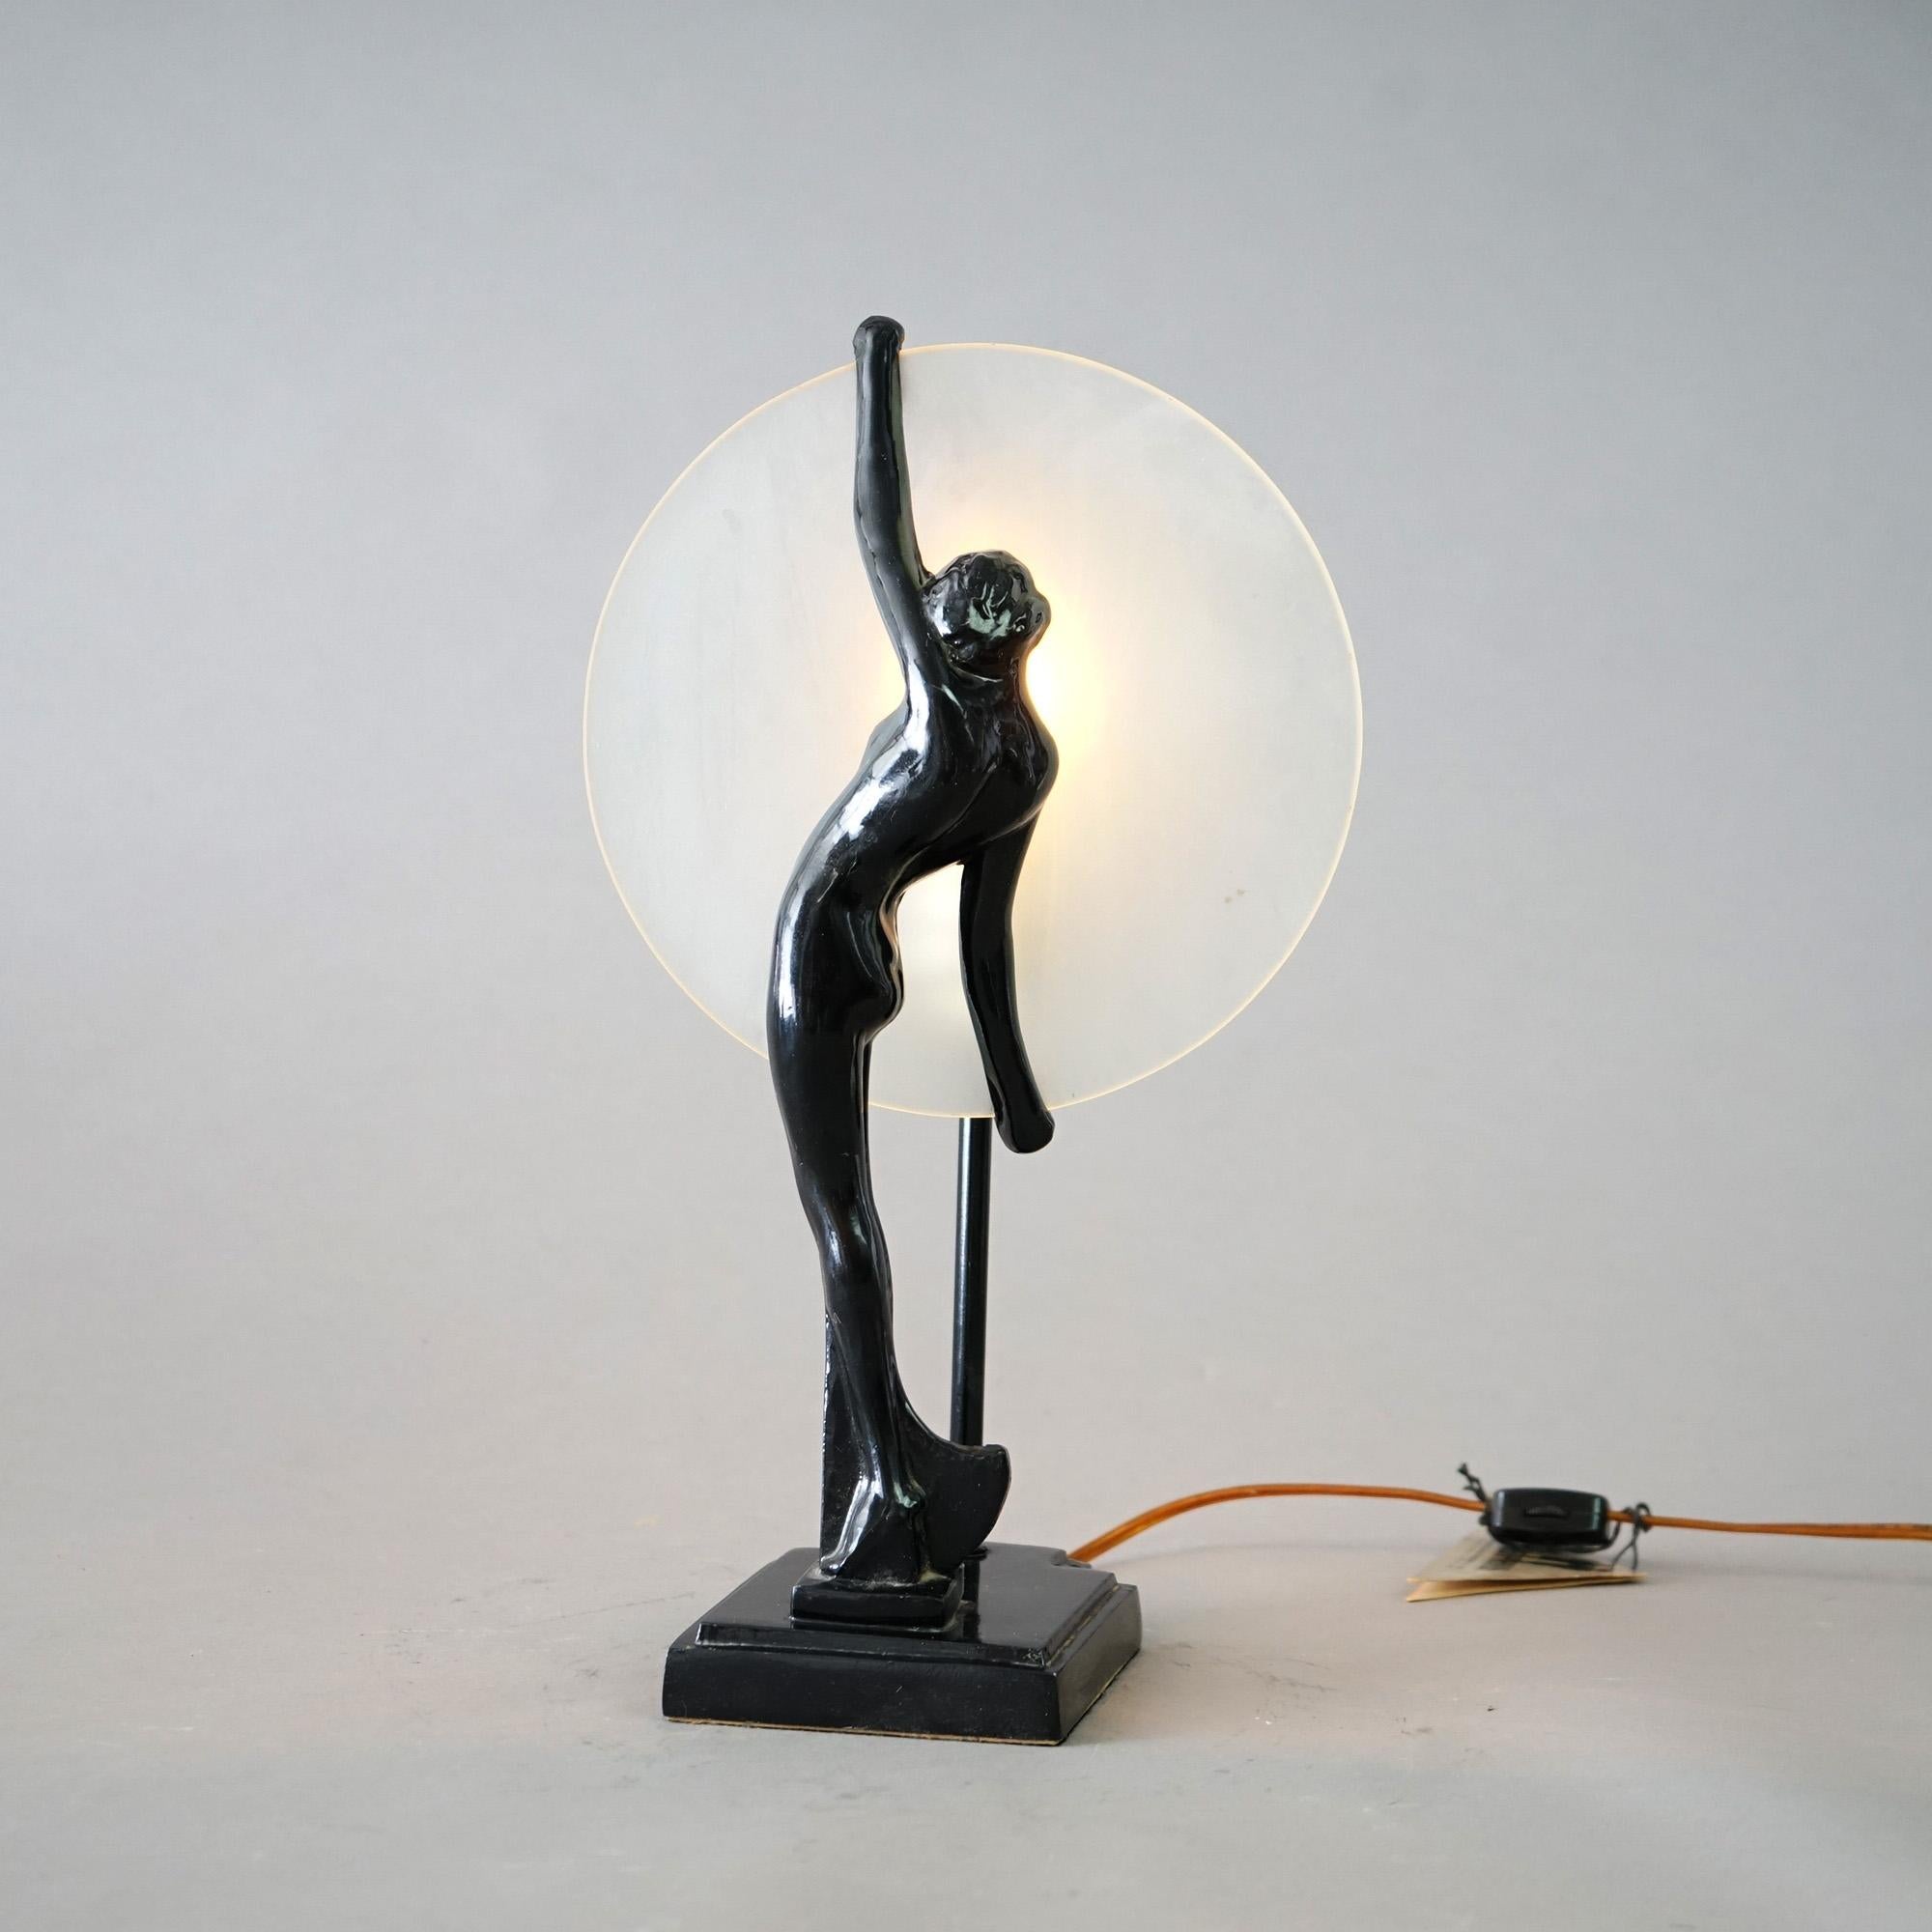 An antique Art Deco sculptural table lamp by Sarsaparilla in the manner of Frankart offers figural standing woman raising the moon, maker tag as photographed,  20th century

Measures - 14.5